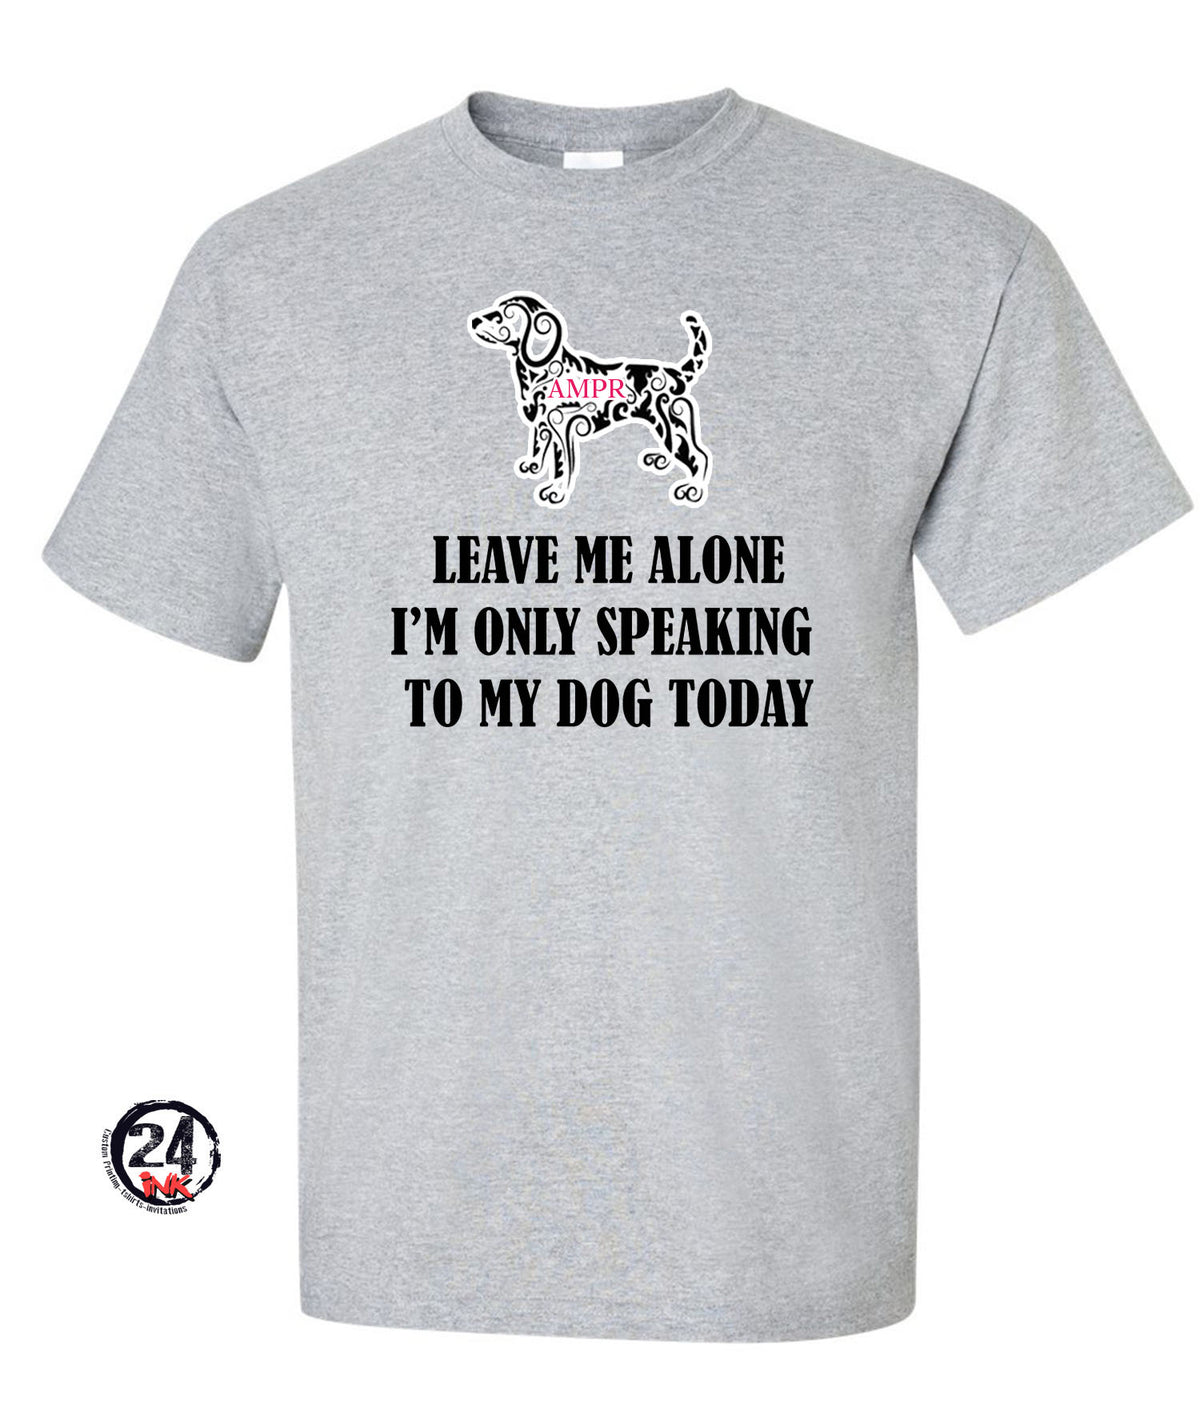 I'm only speaking to my dog today t-shirt